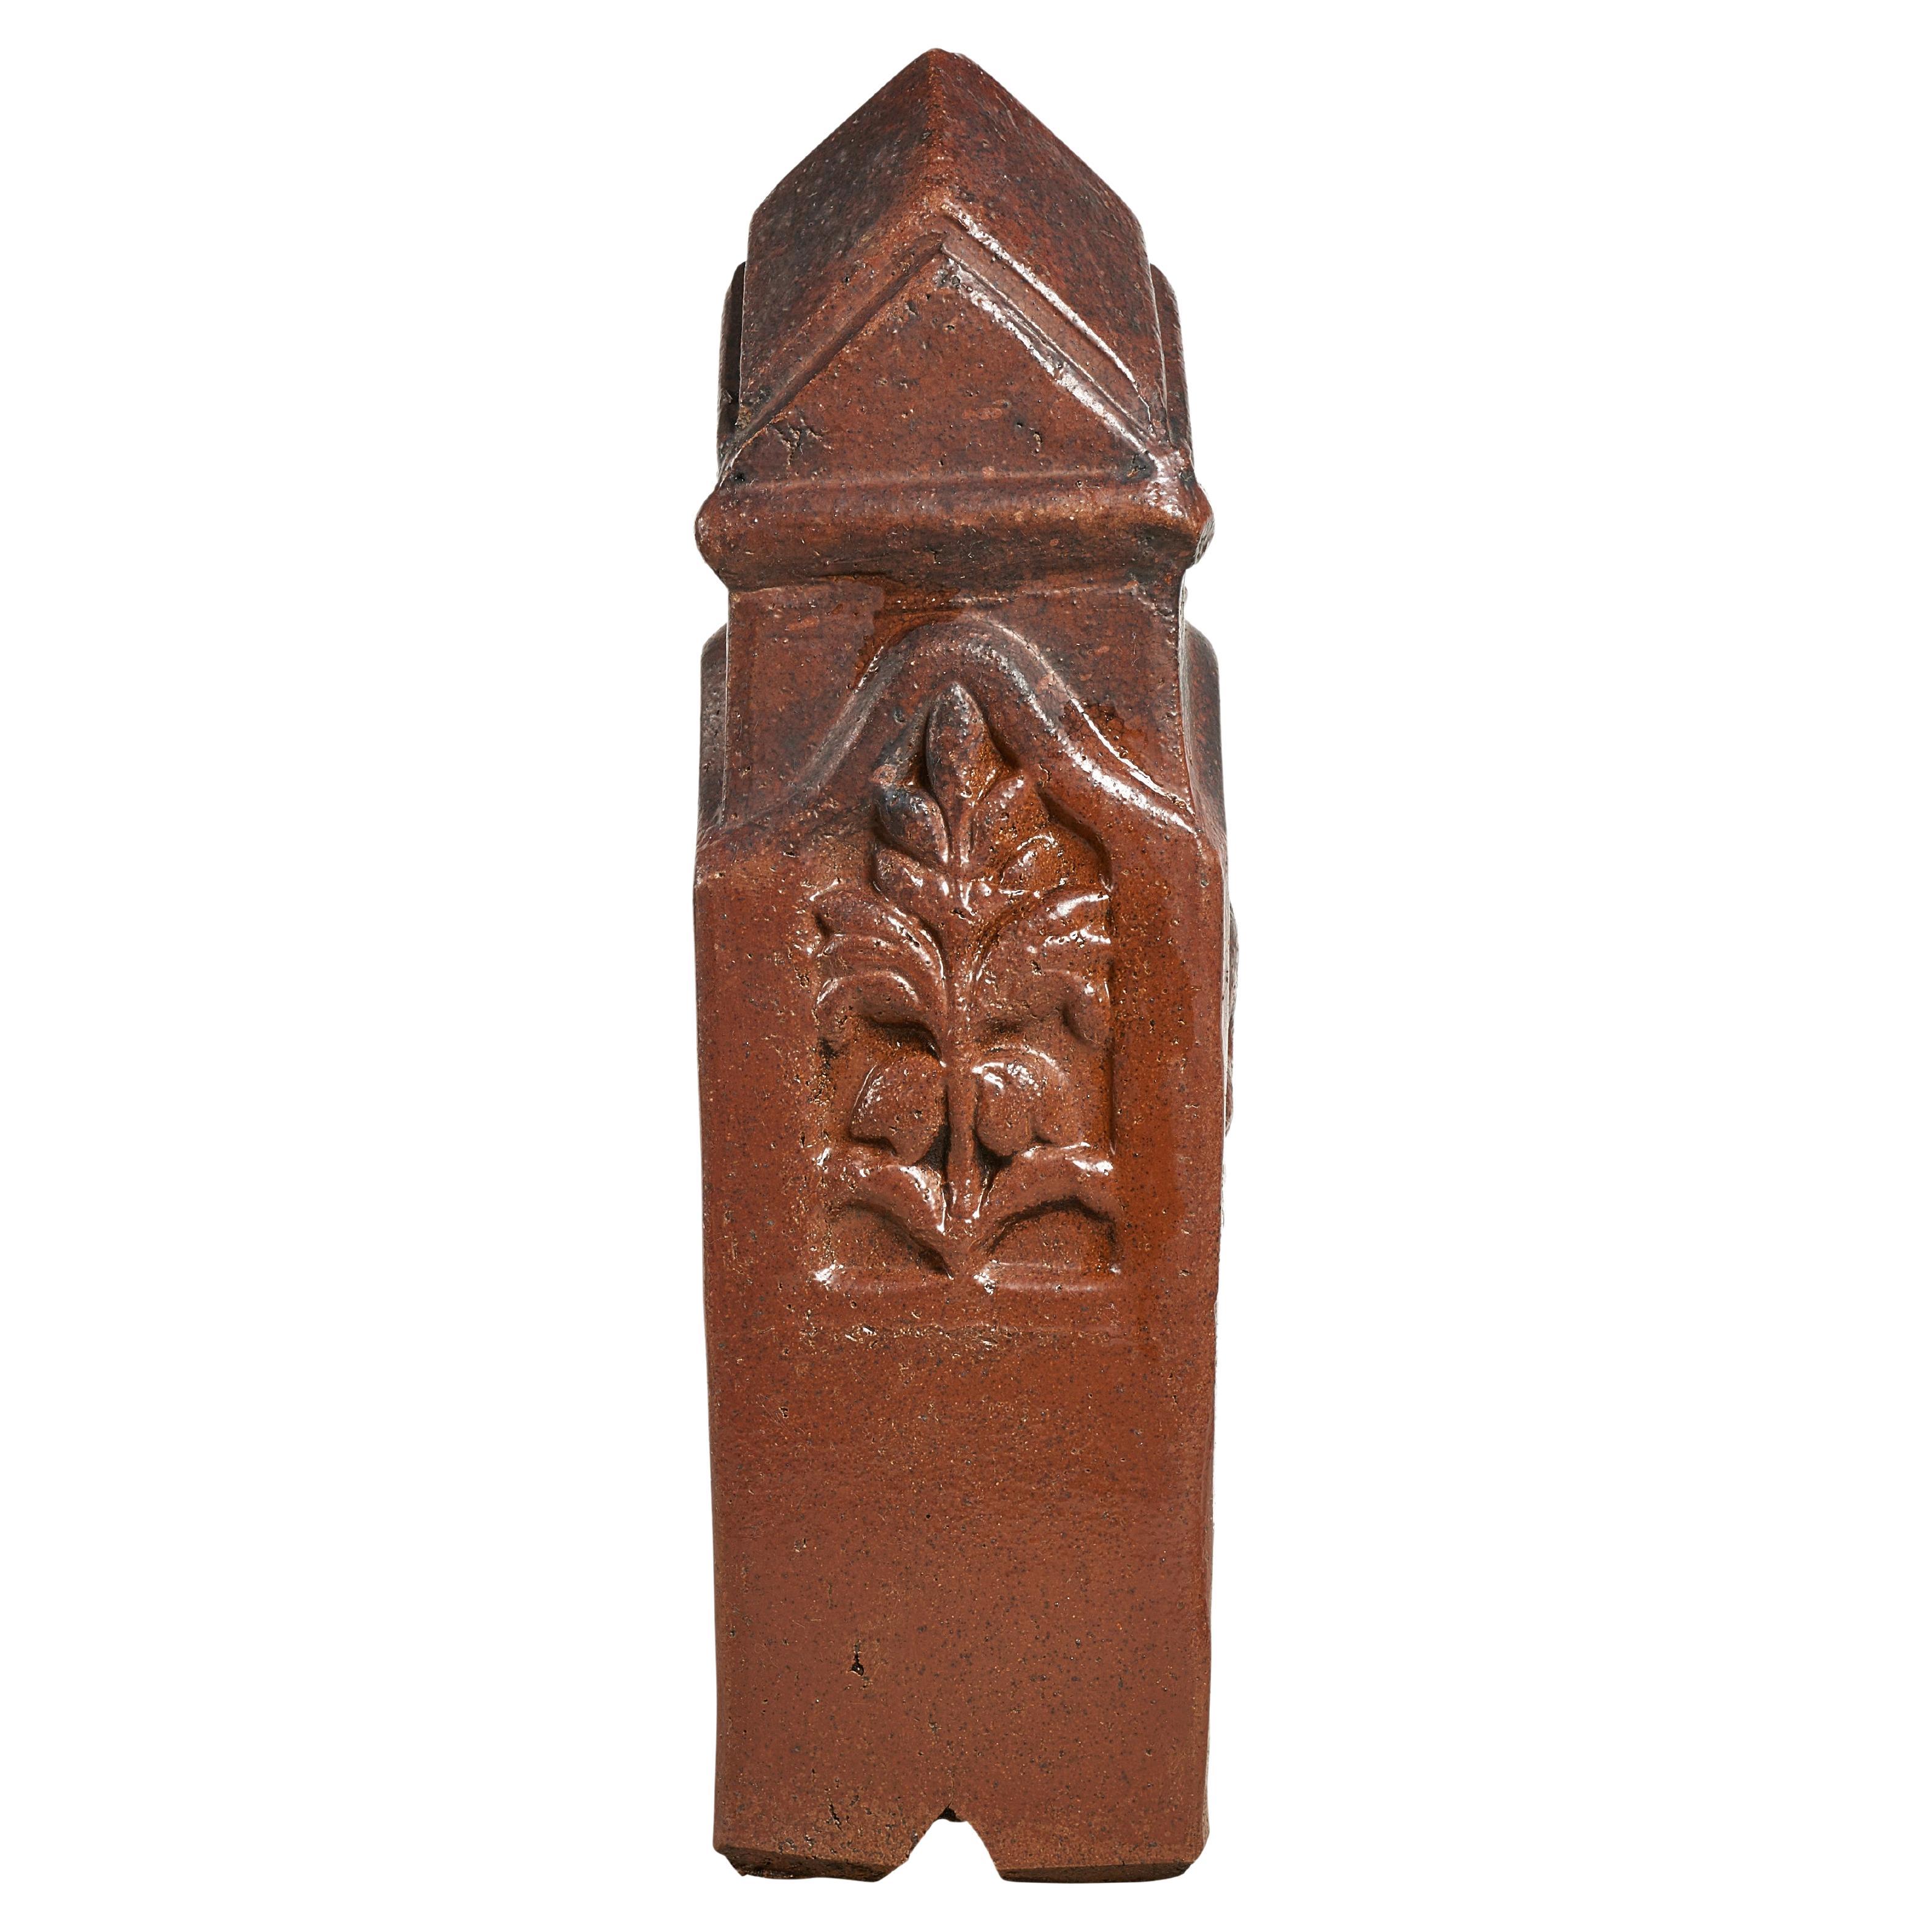 Glazed terra cotta garden boundary post with floral design. Multiples available.